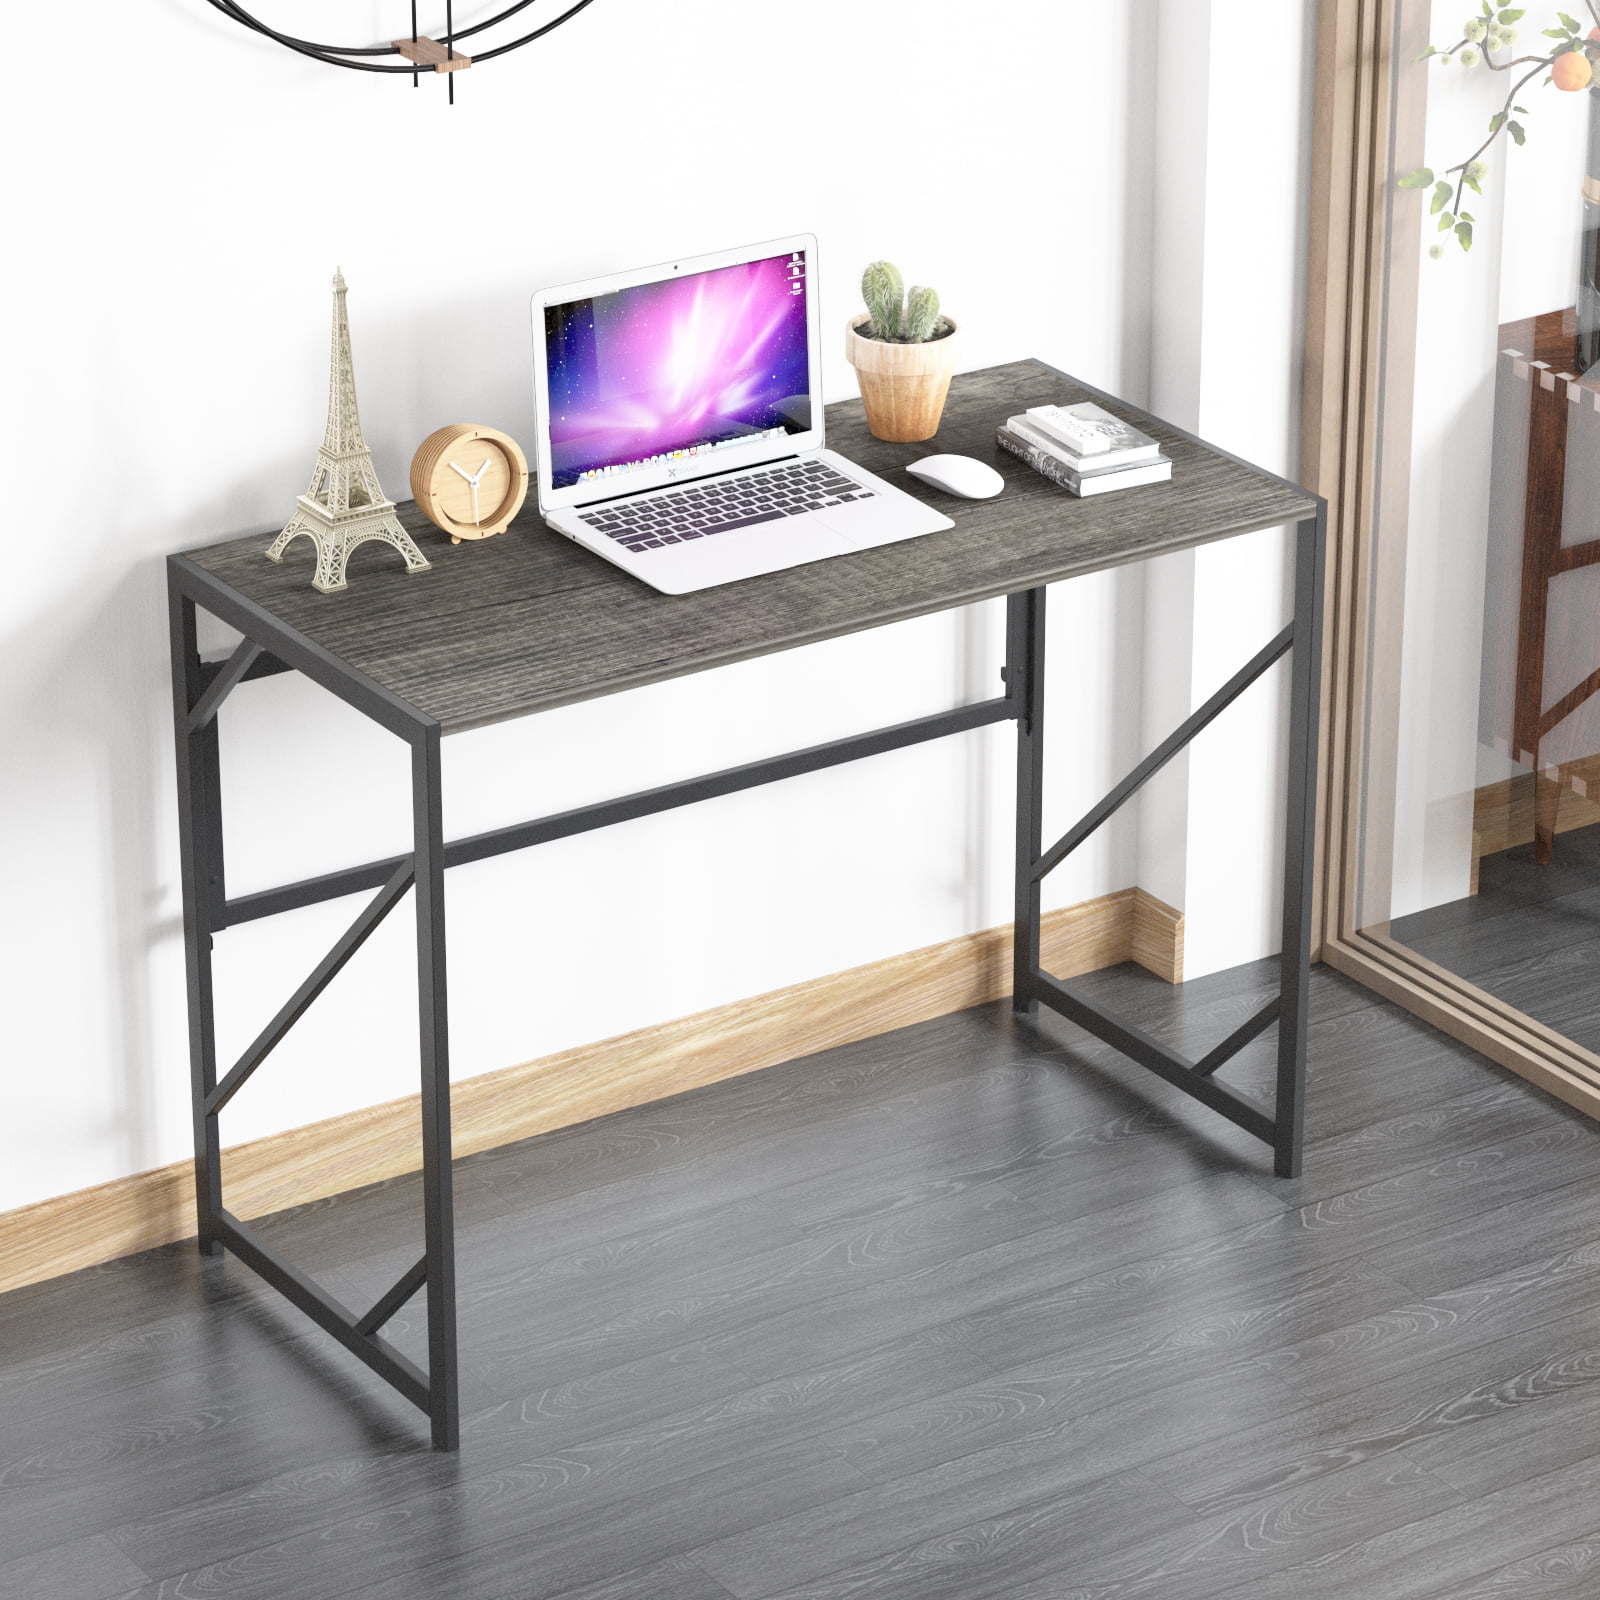 Folding Computer Desk Small Simple Design PC Laptop Table Home Furniture Wooden 